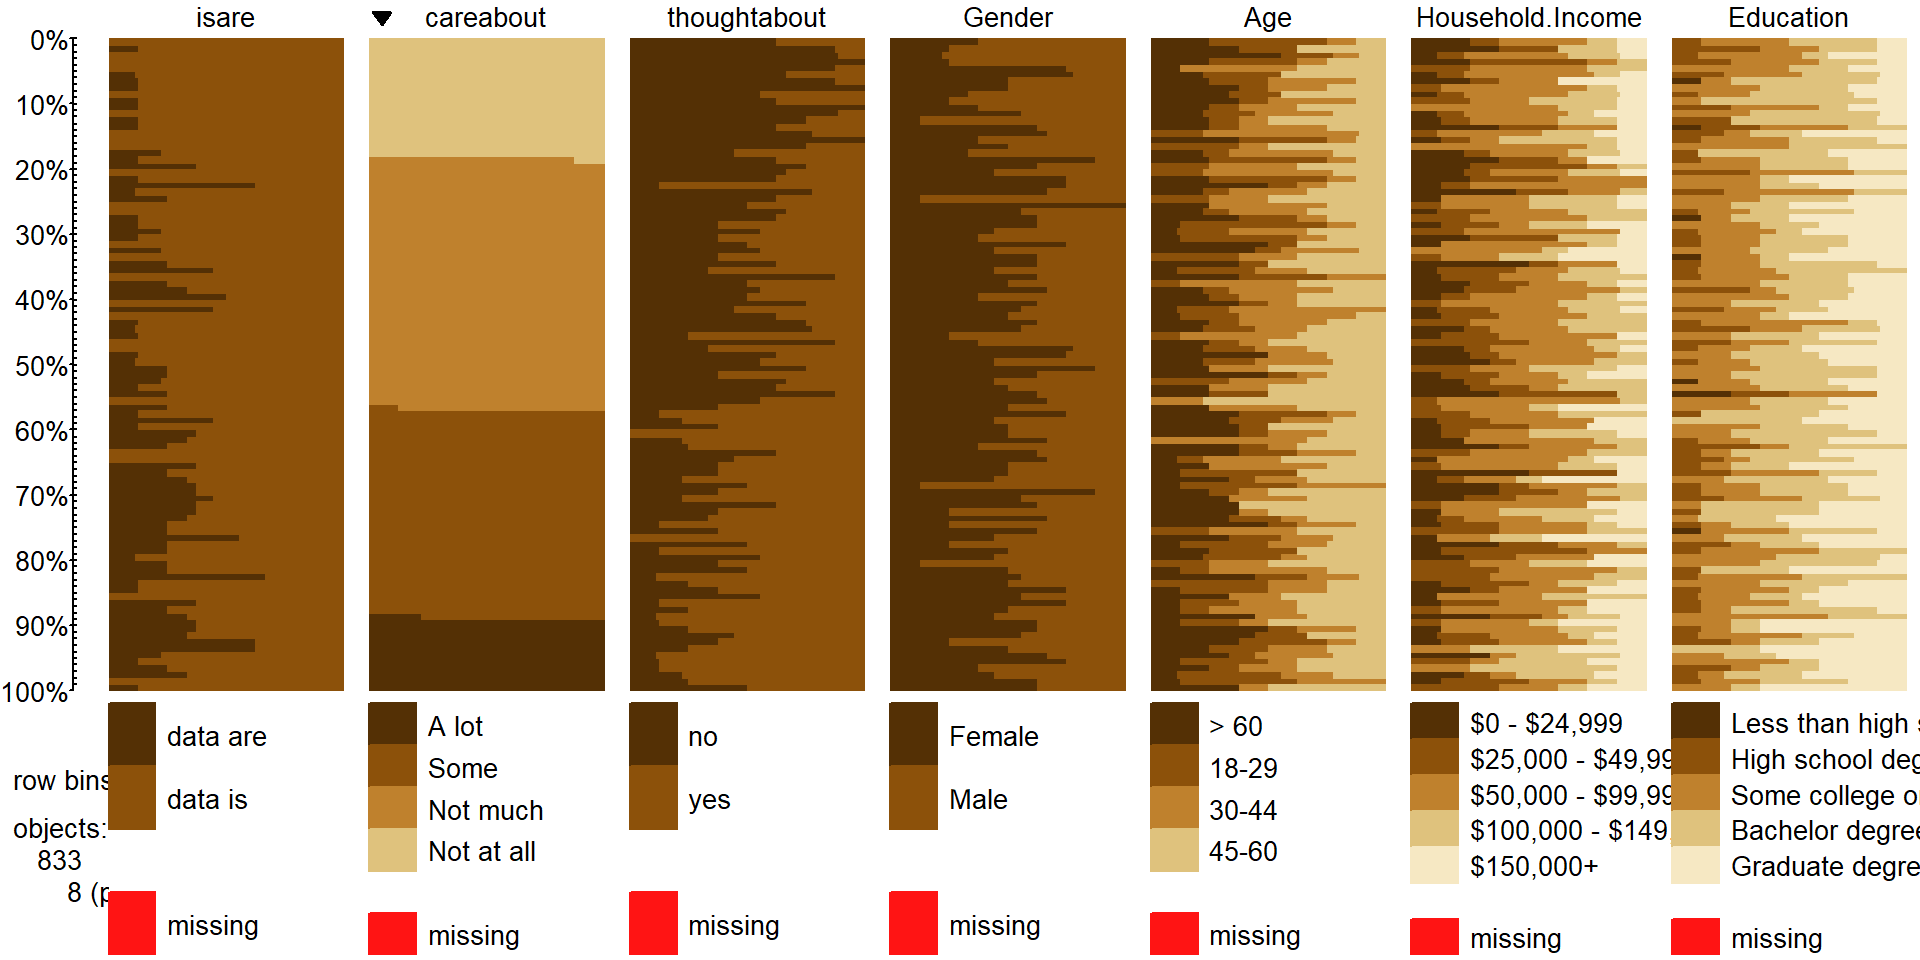 Tableplot of data from “data-is-vs-data-are” survey, sorted by “CareAbout” responses.